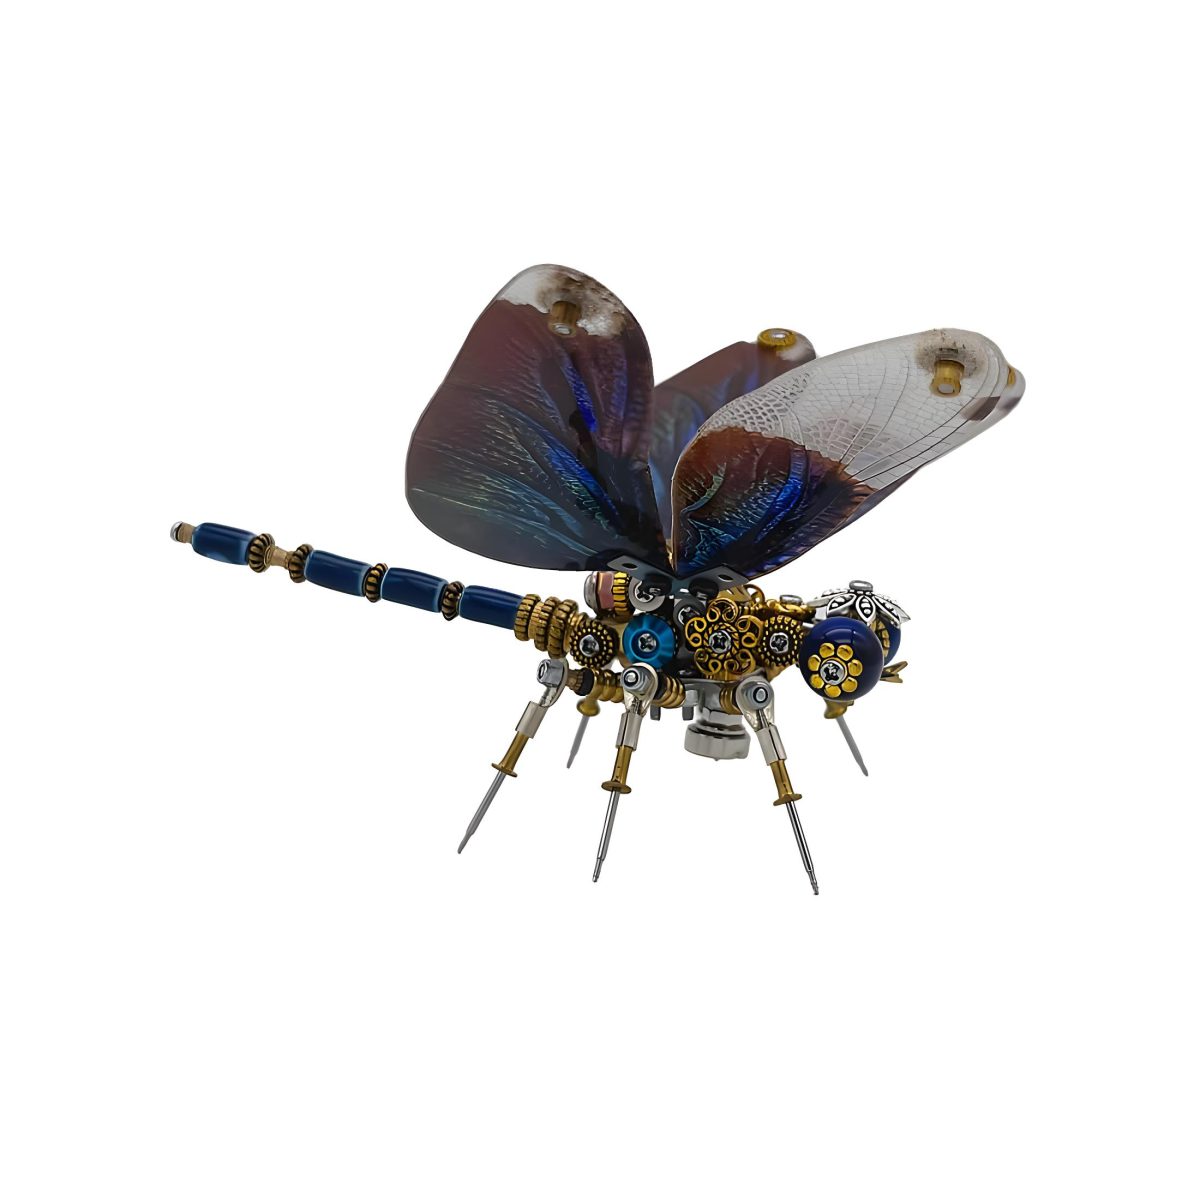 Punk Metallic Dragonfly 3D DIY Insects Metal Assembly Toy, Creative Ornament